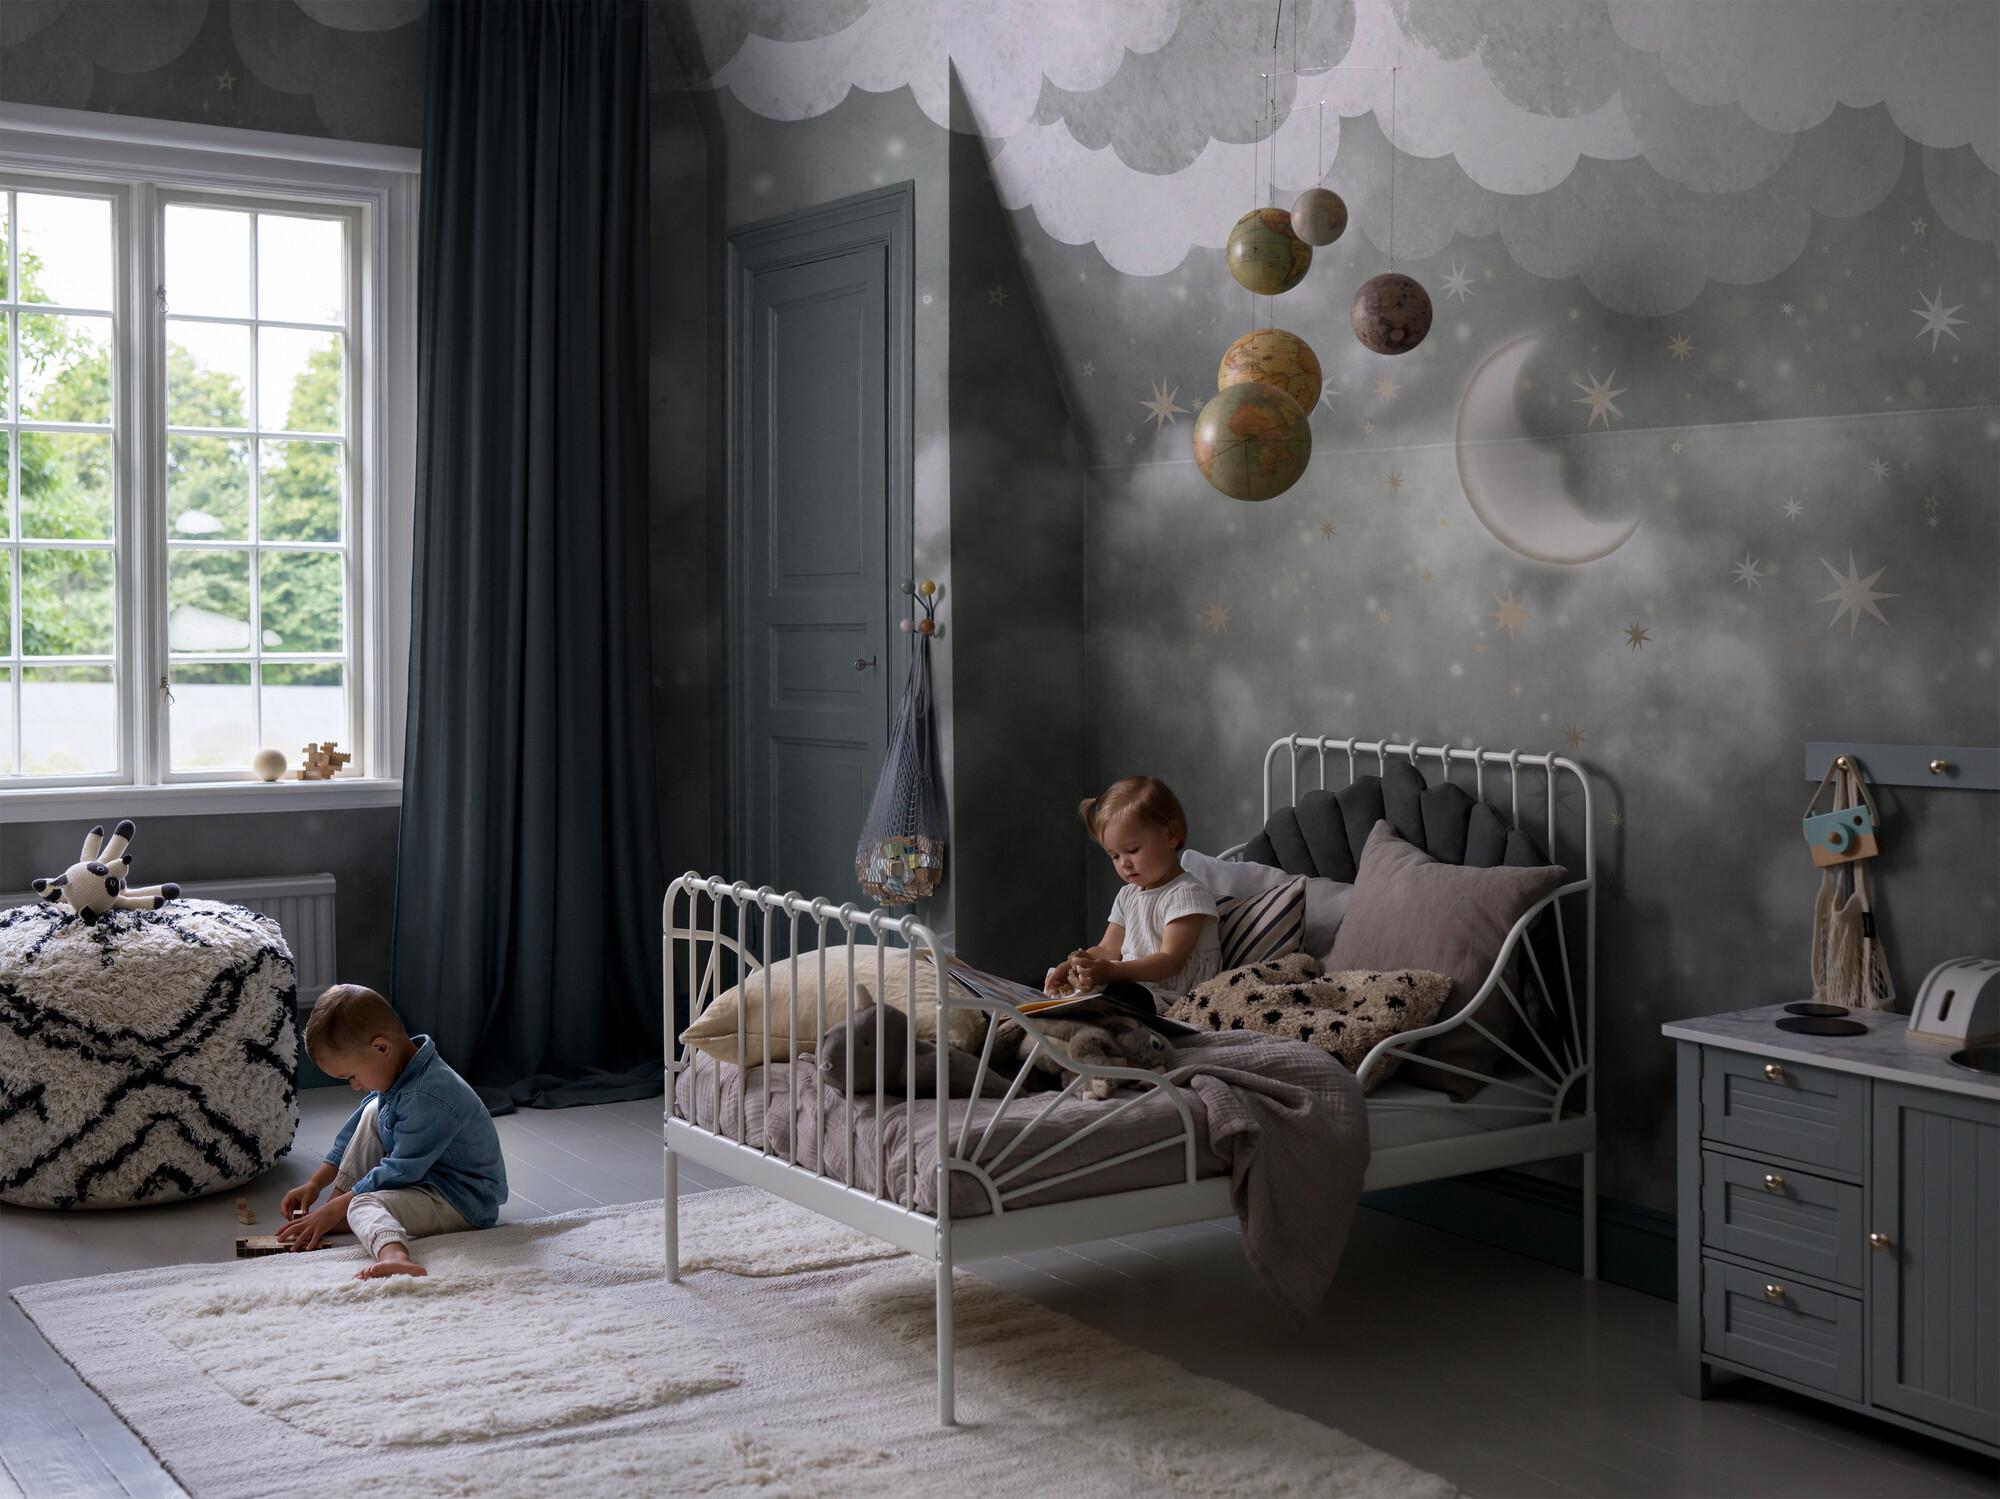 Stars in the sky PW212501 Mr. Perswall Wallpape